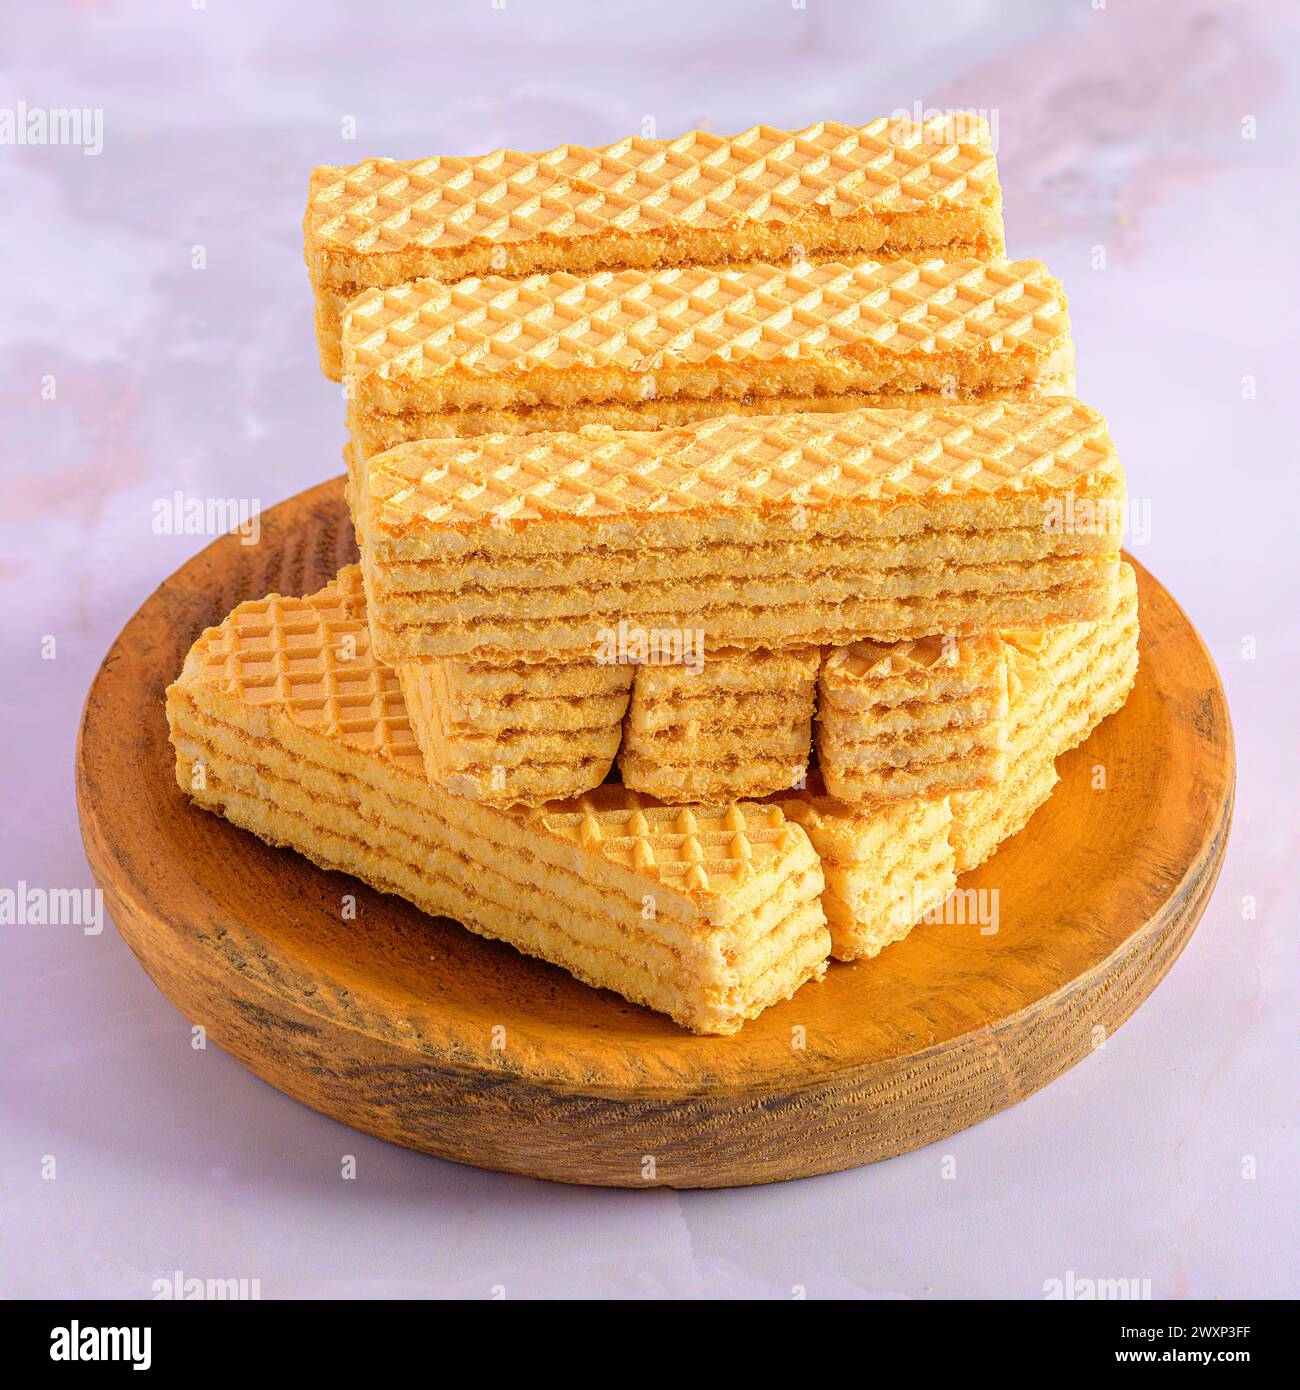 A Cream Biscuit Tower on Wooden Plate Stock Photo